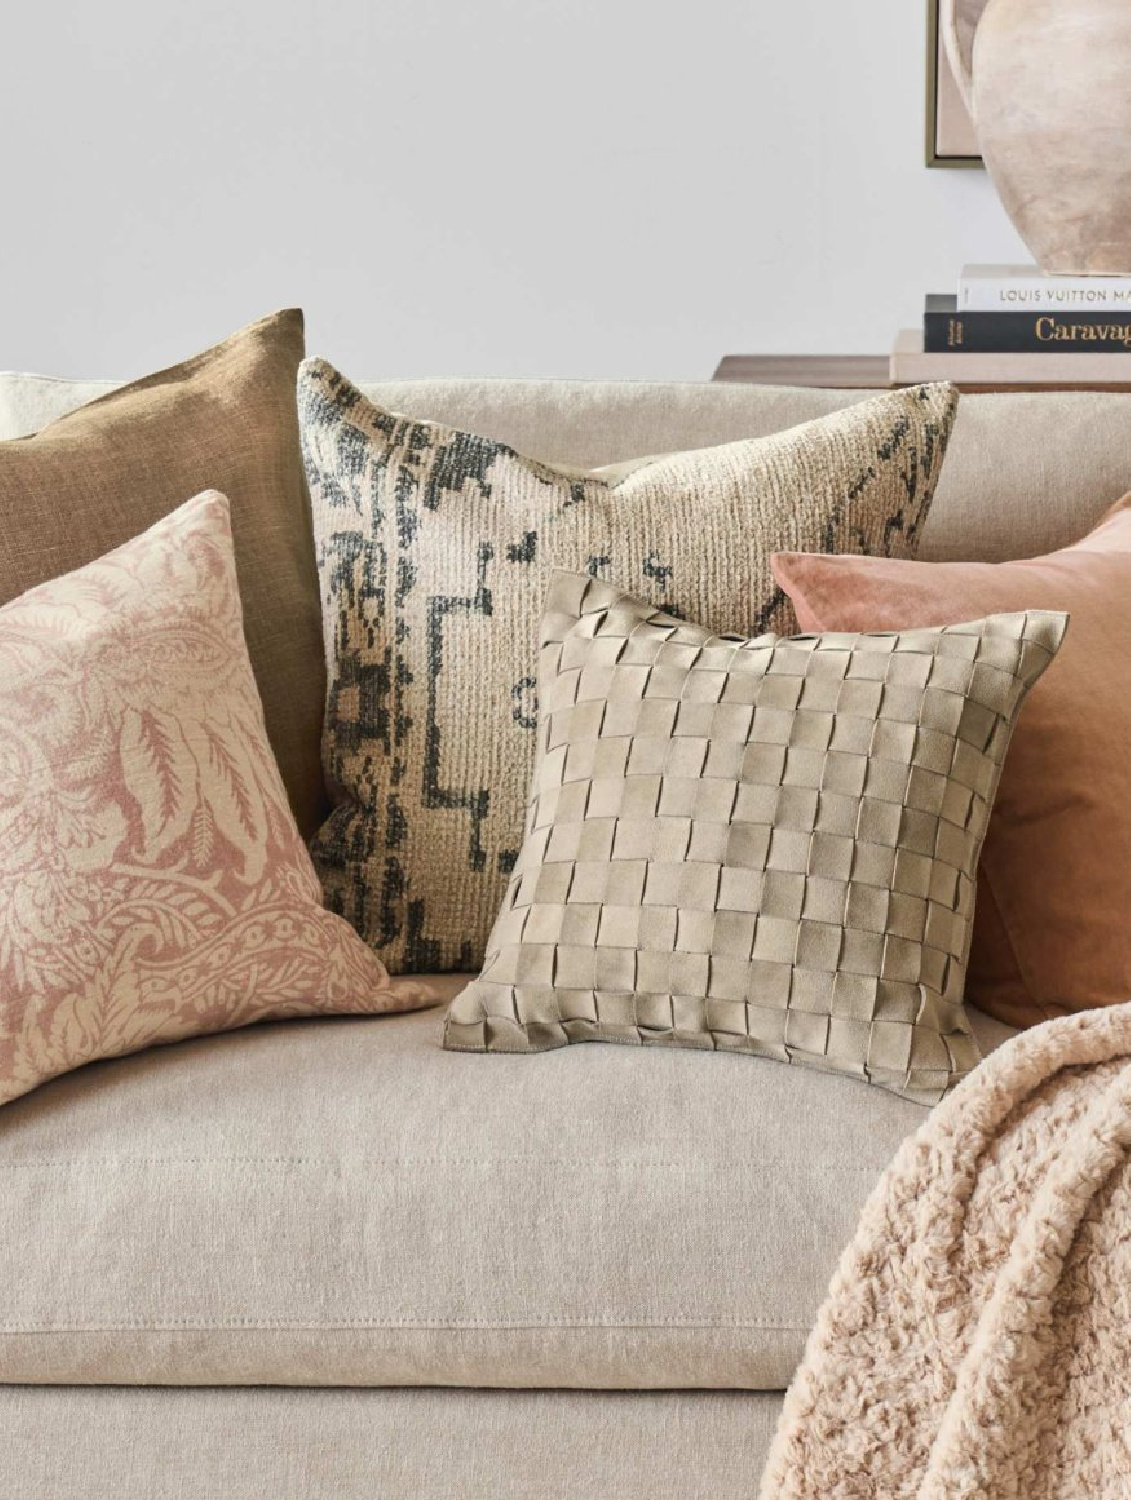 Throw pillows in soft neutrals and rose colors on a sofa, Pottery Barn.